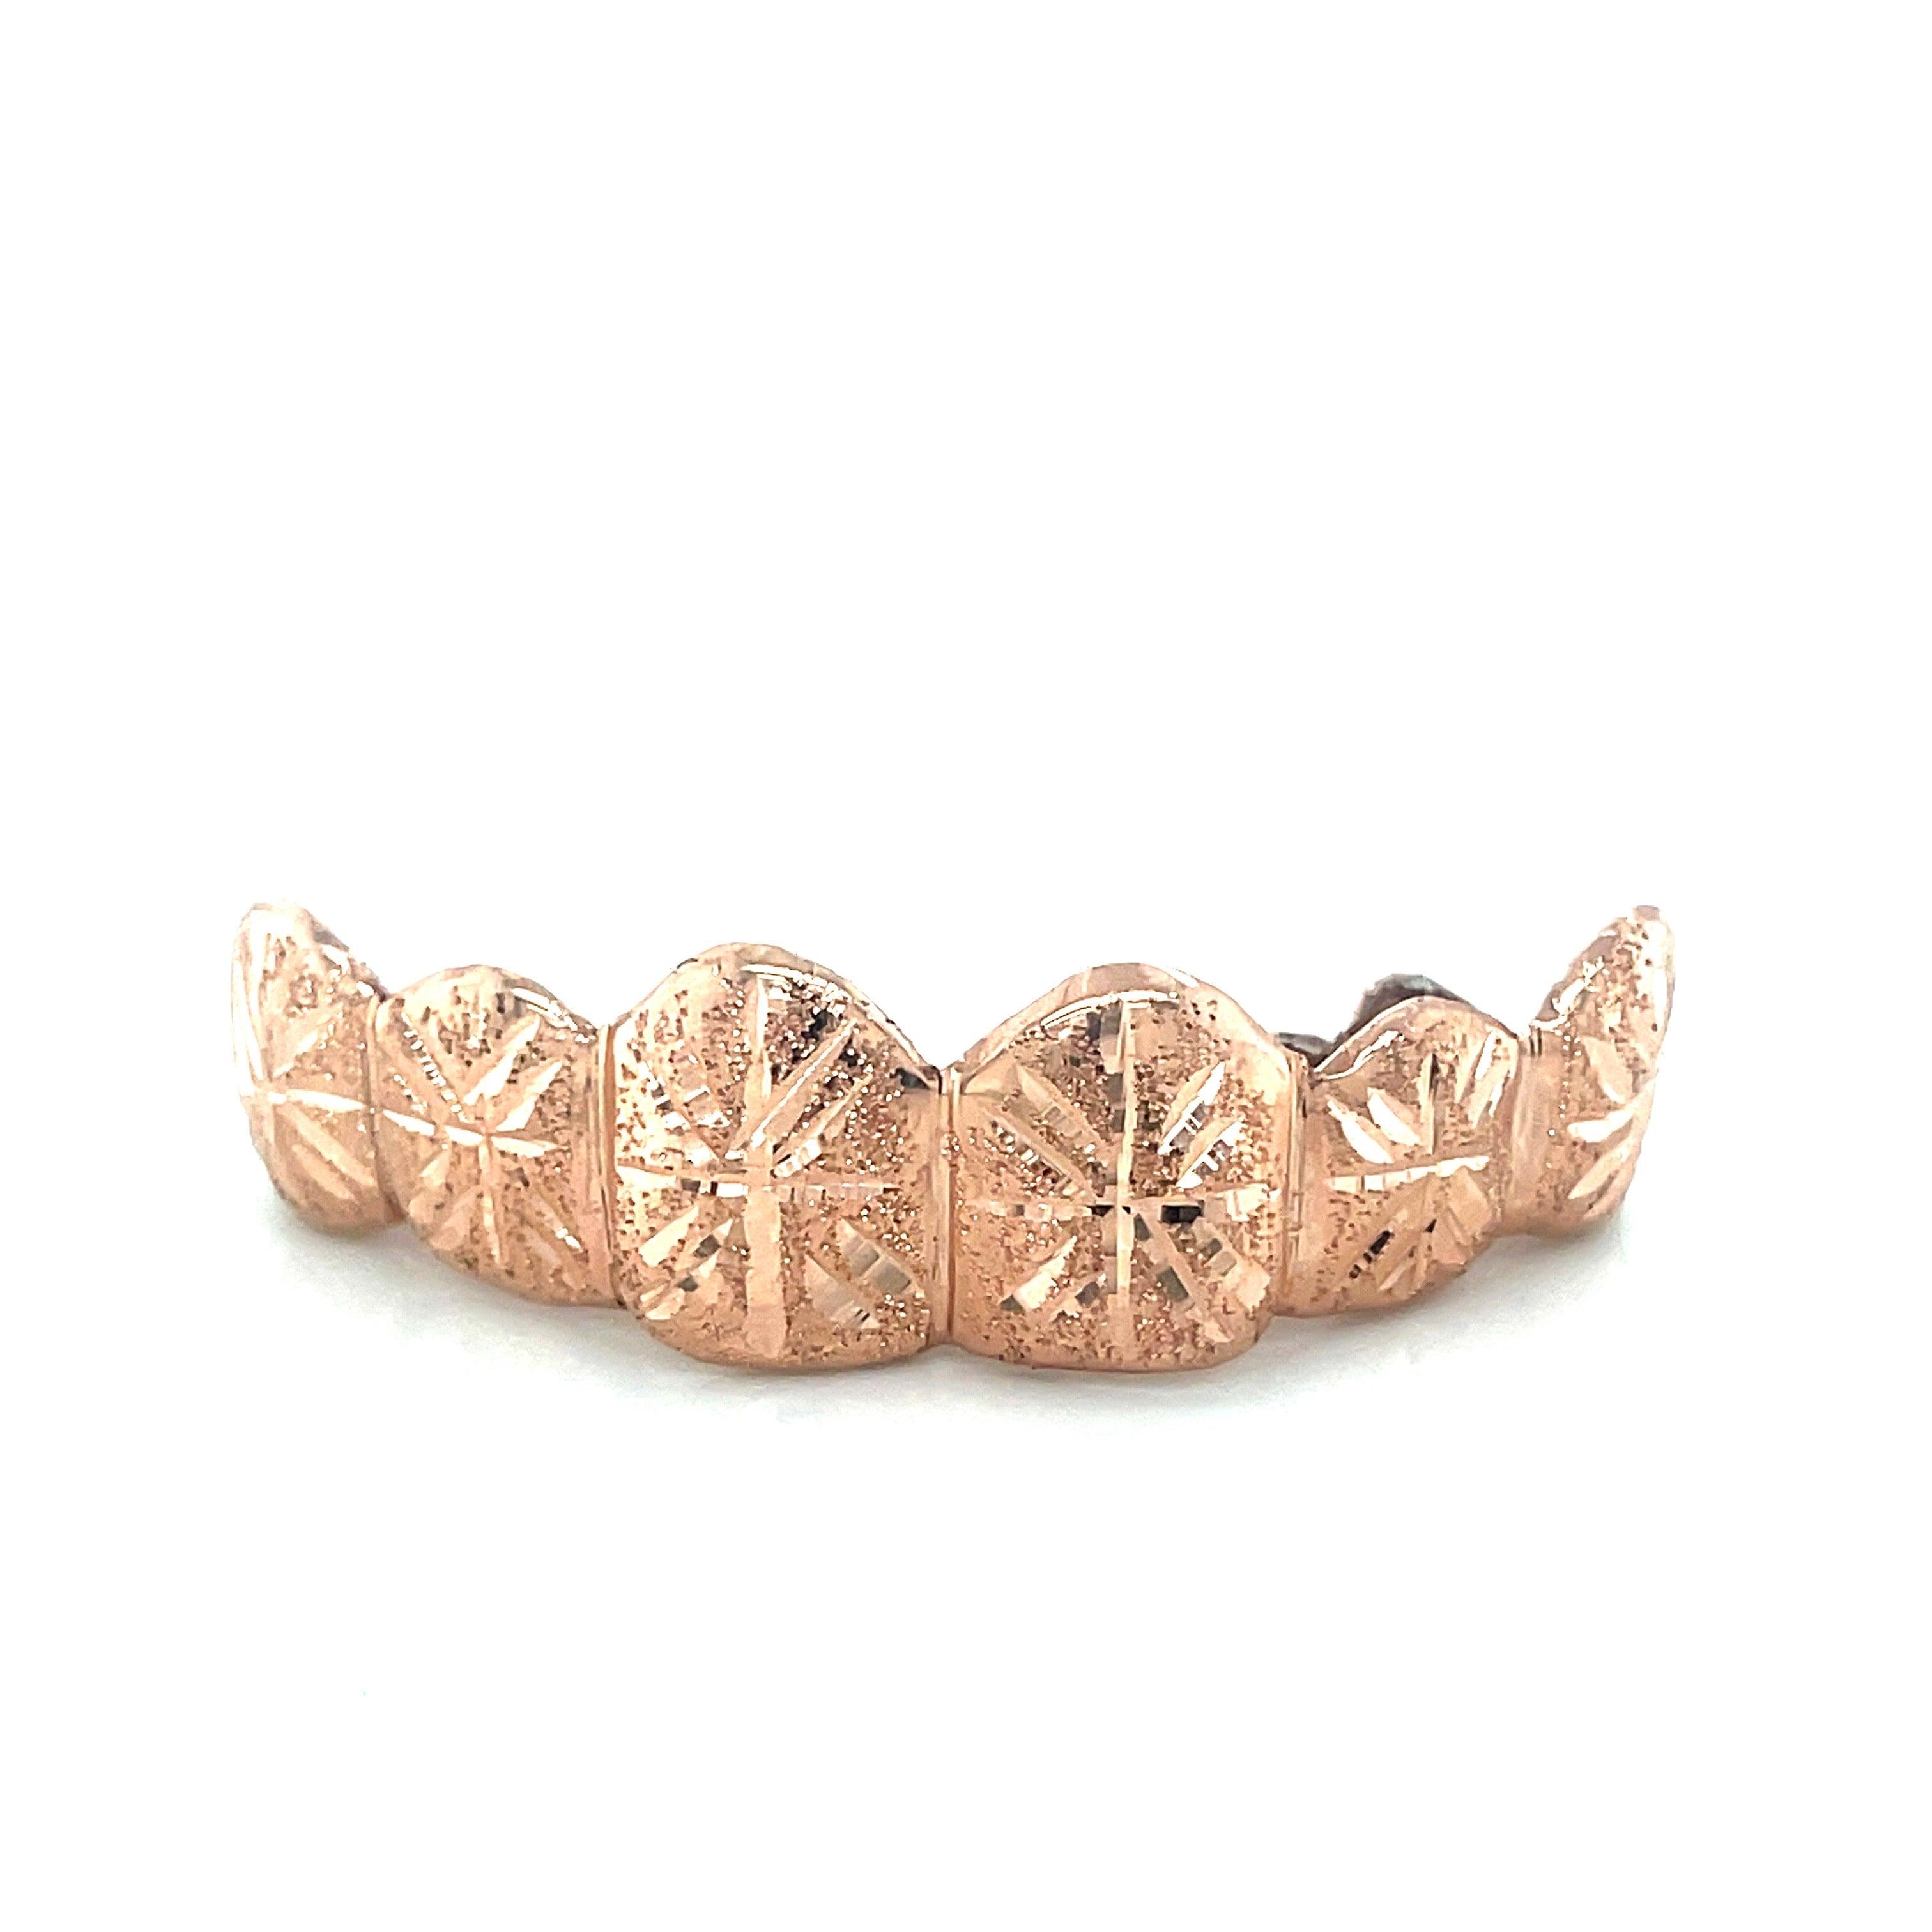 6pc Rose Gold Snowfall Top Grillz - Seattle Gold Grillz